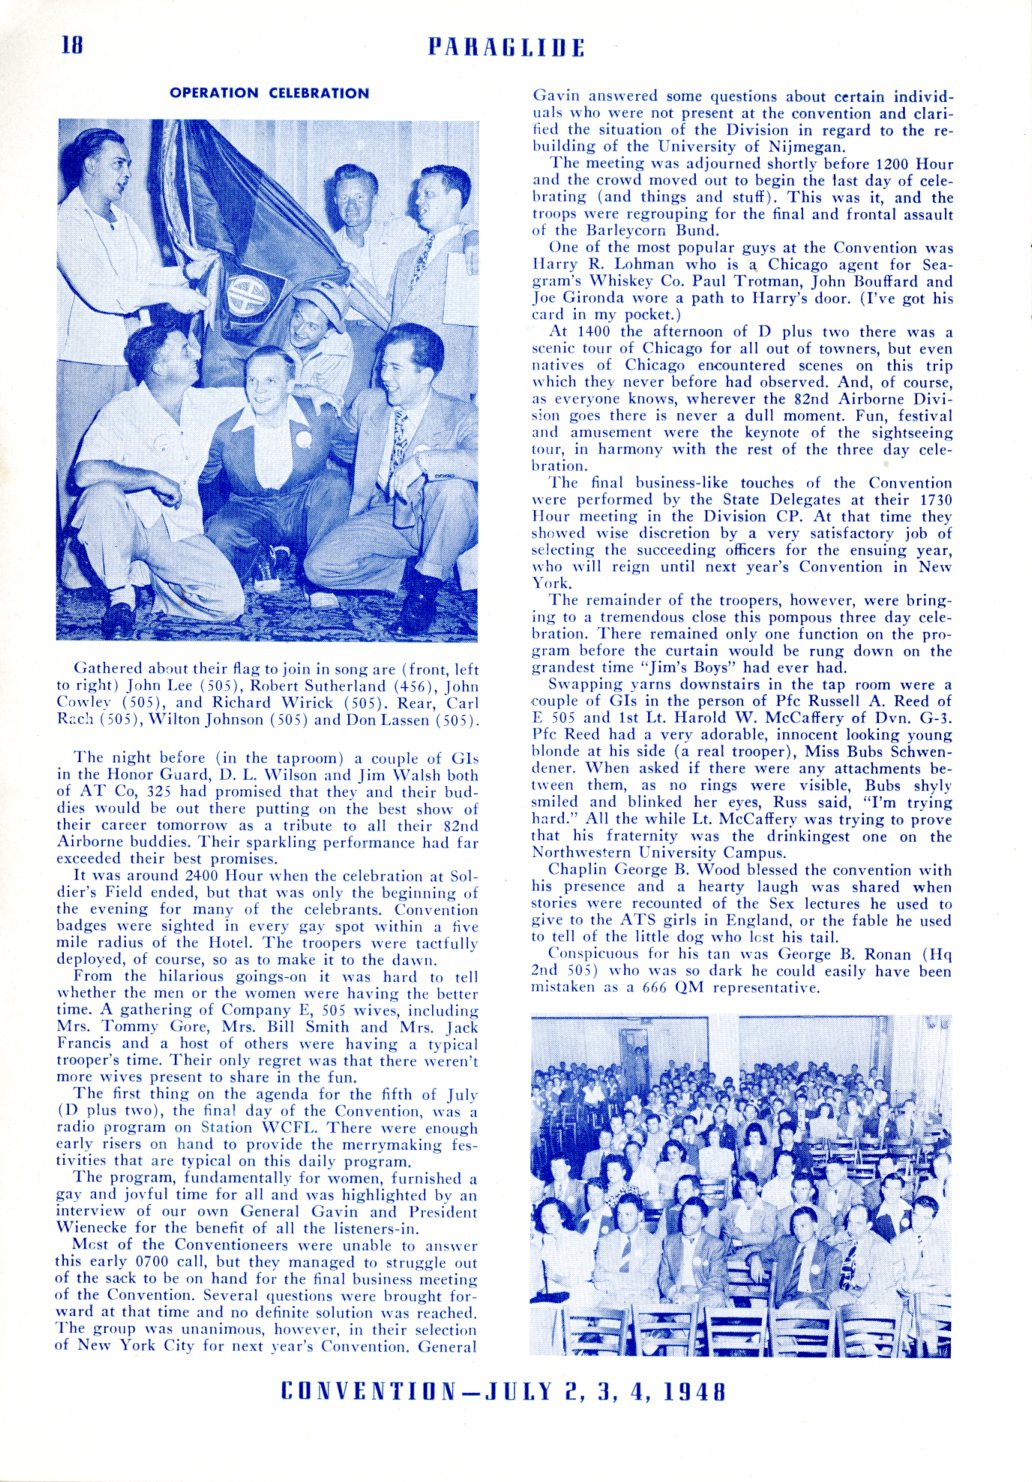 1947-Paraglide page-18